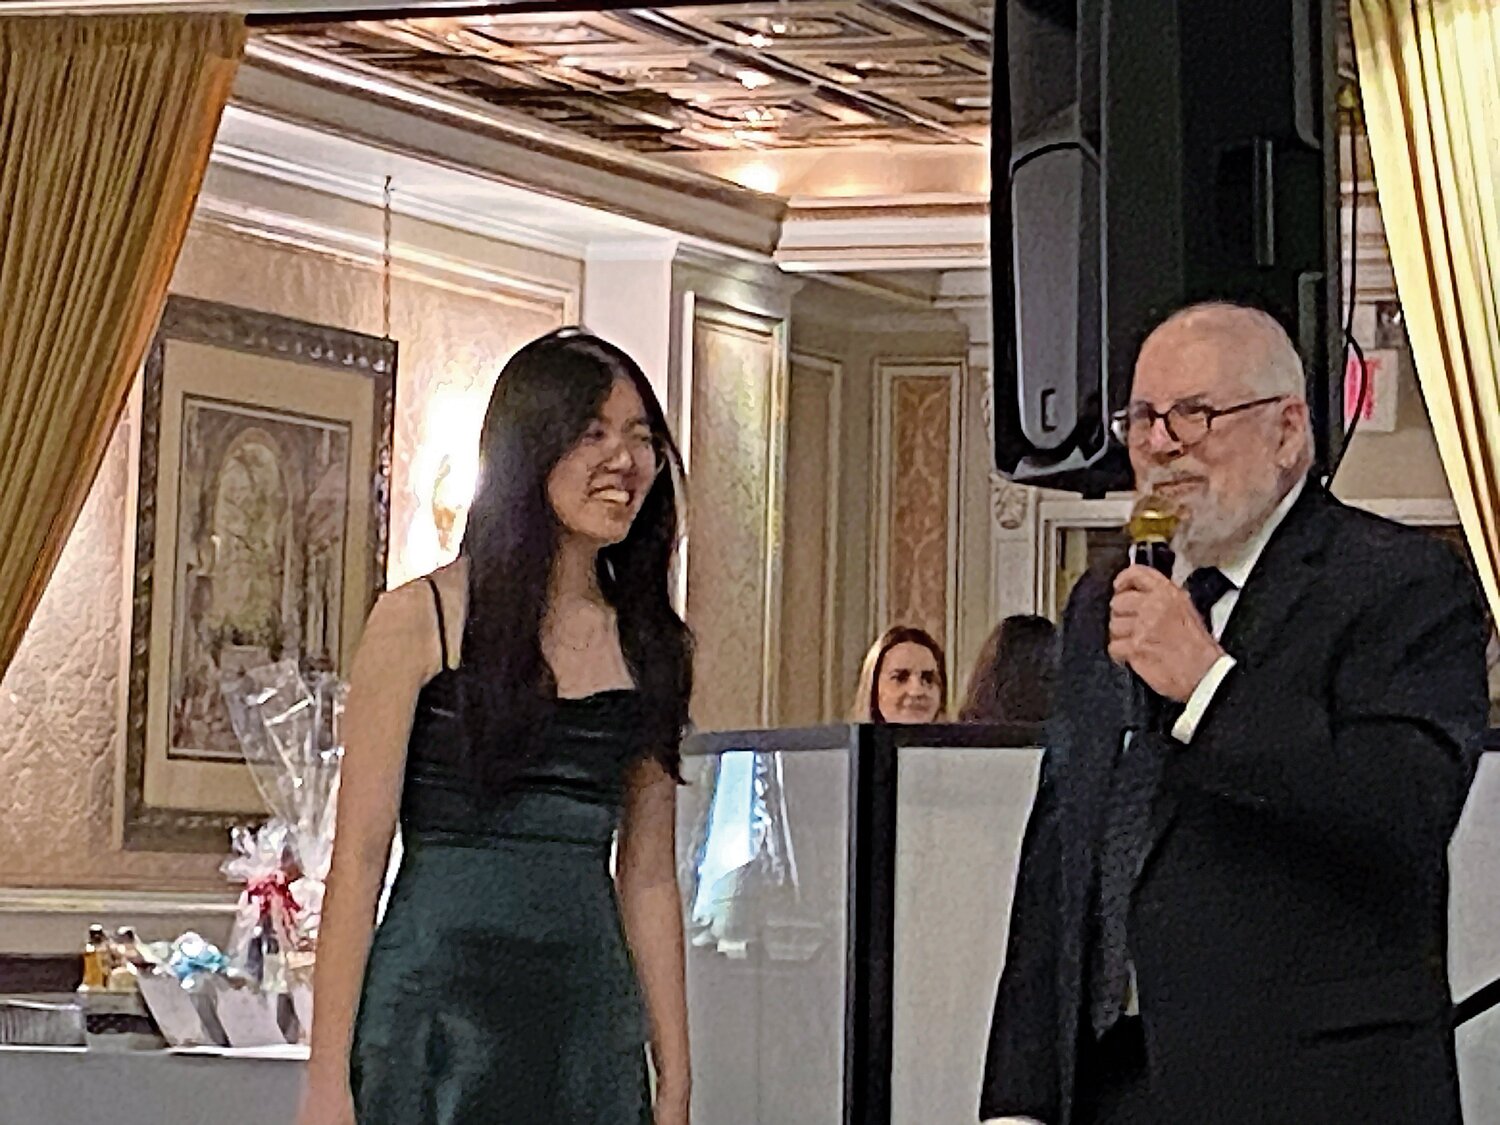 Richard Stein, former publisher of The Riverdale Press and son of co-founder Celia Stein, awards Shiya Lin, a Bronx High School of Science senior, with the first Celia Stein Kiwanis scholarship Friday night.